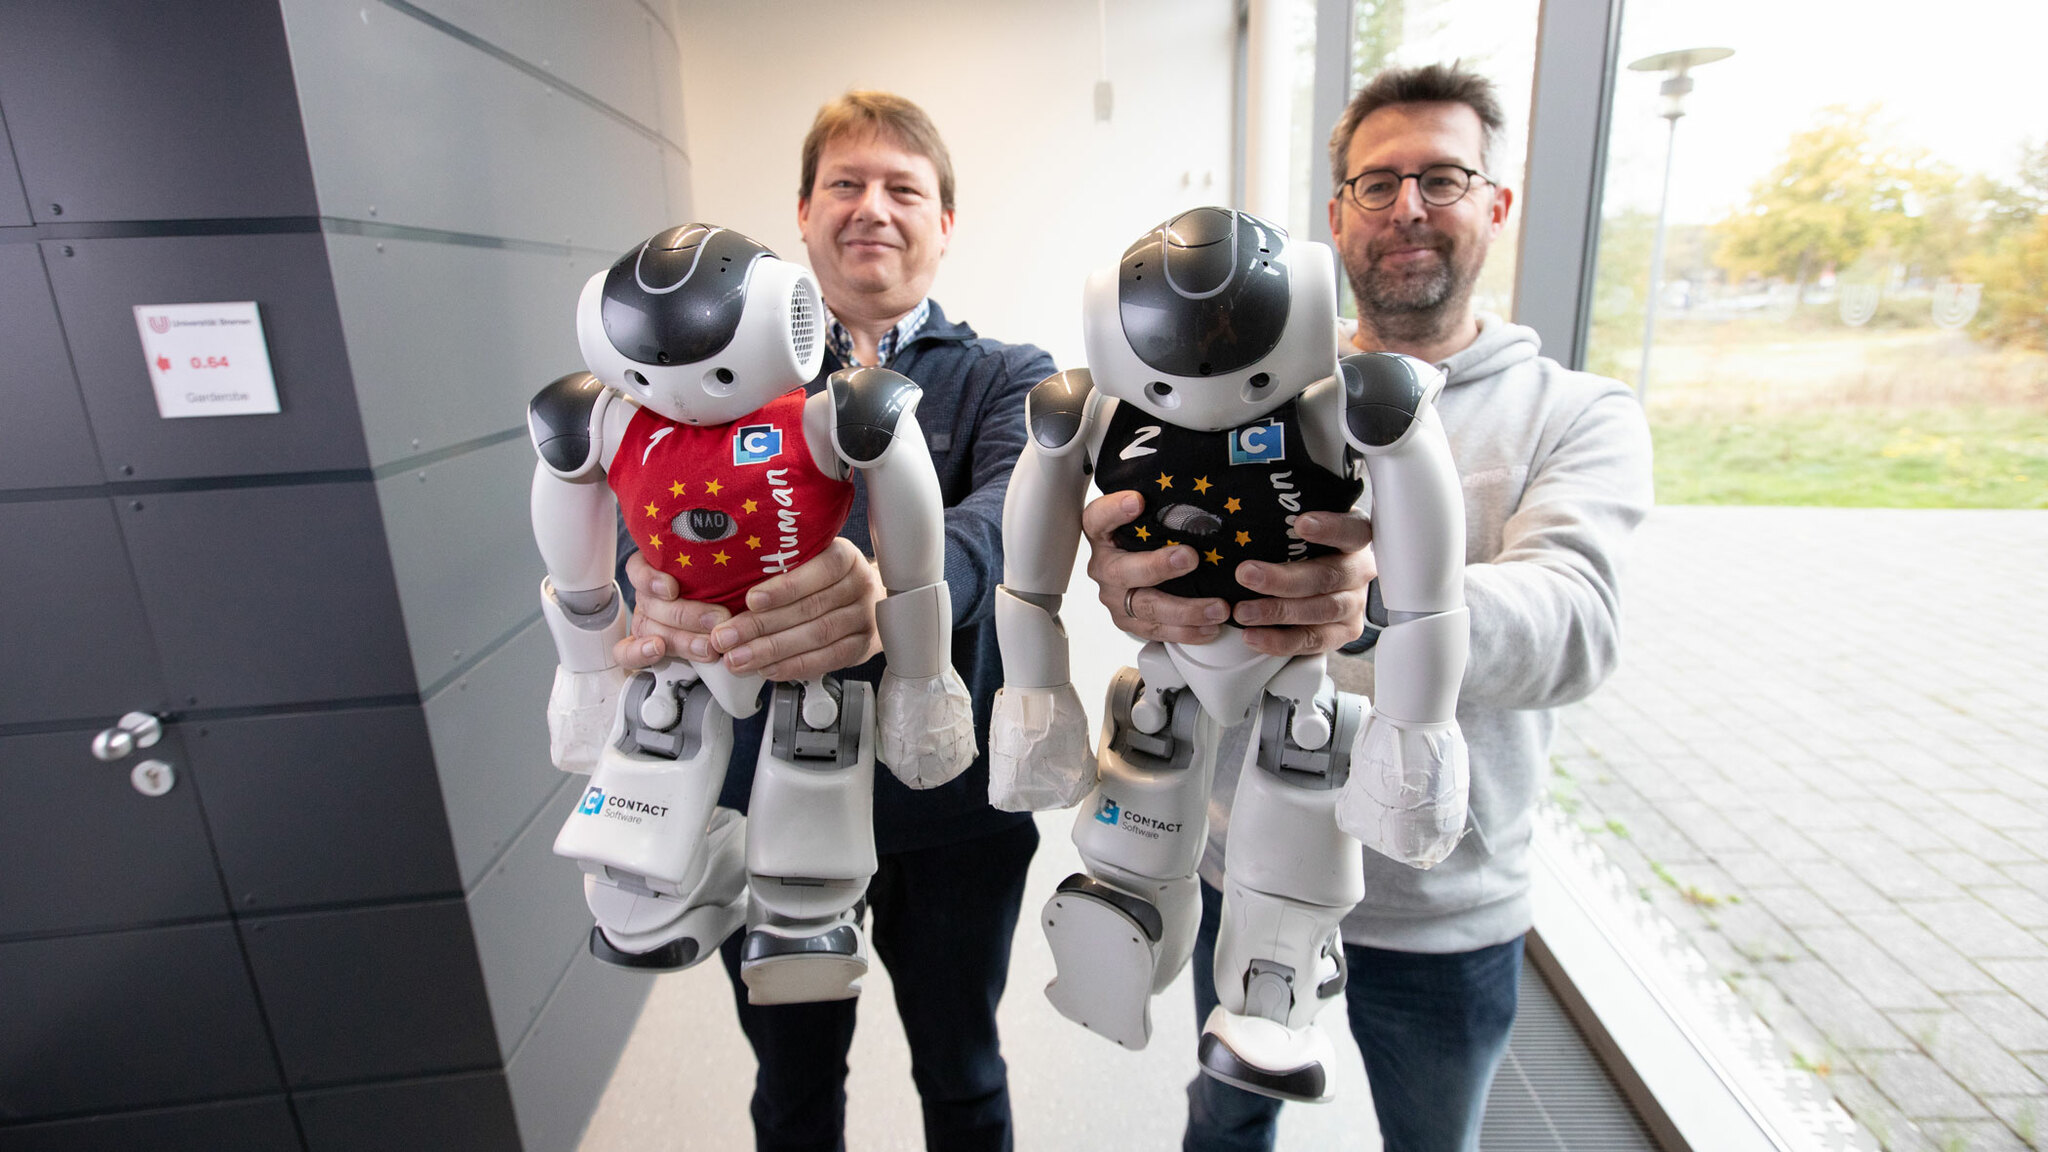 Dr. Thomas Röfer and Dr. Tim Laue hold the robot kickers in their hands